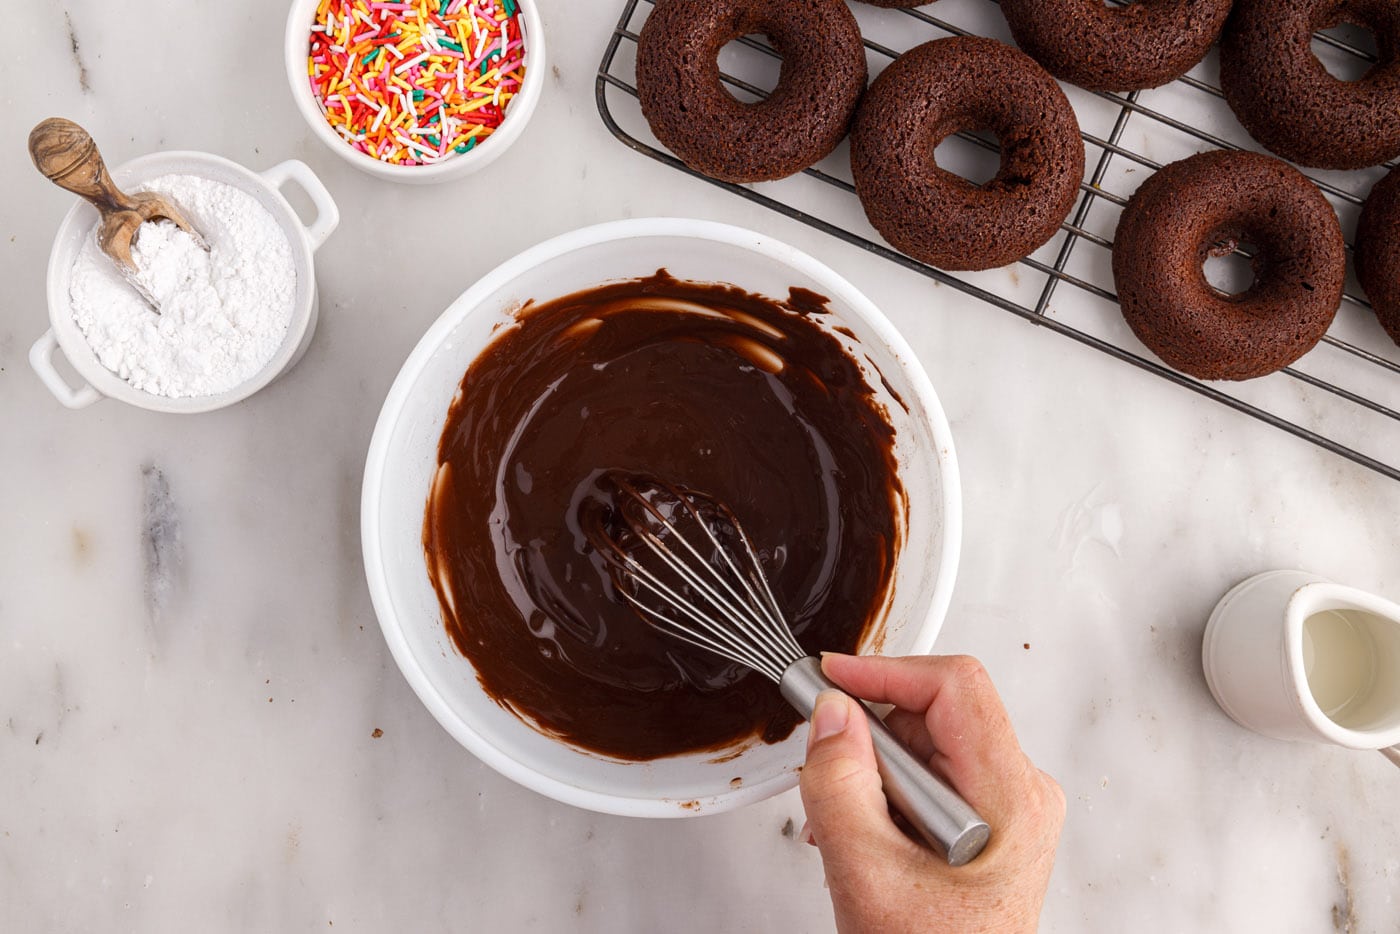 whisking chocolate glaze in a bowl